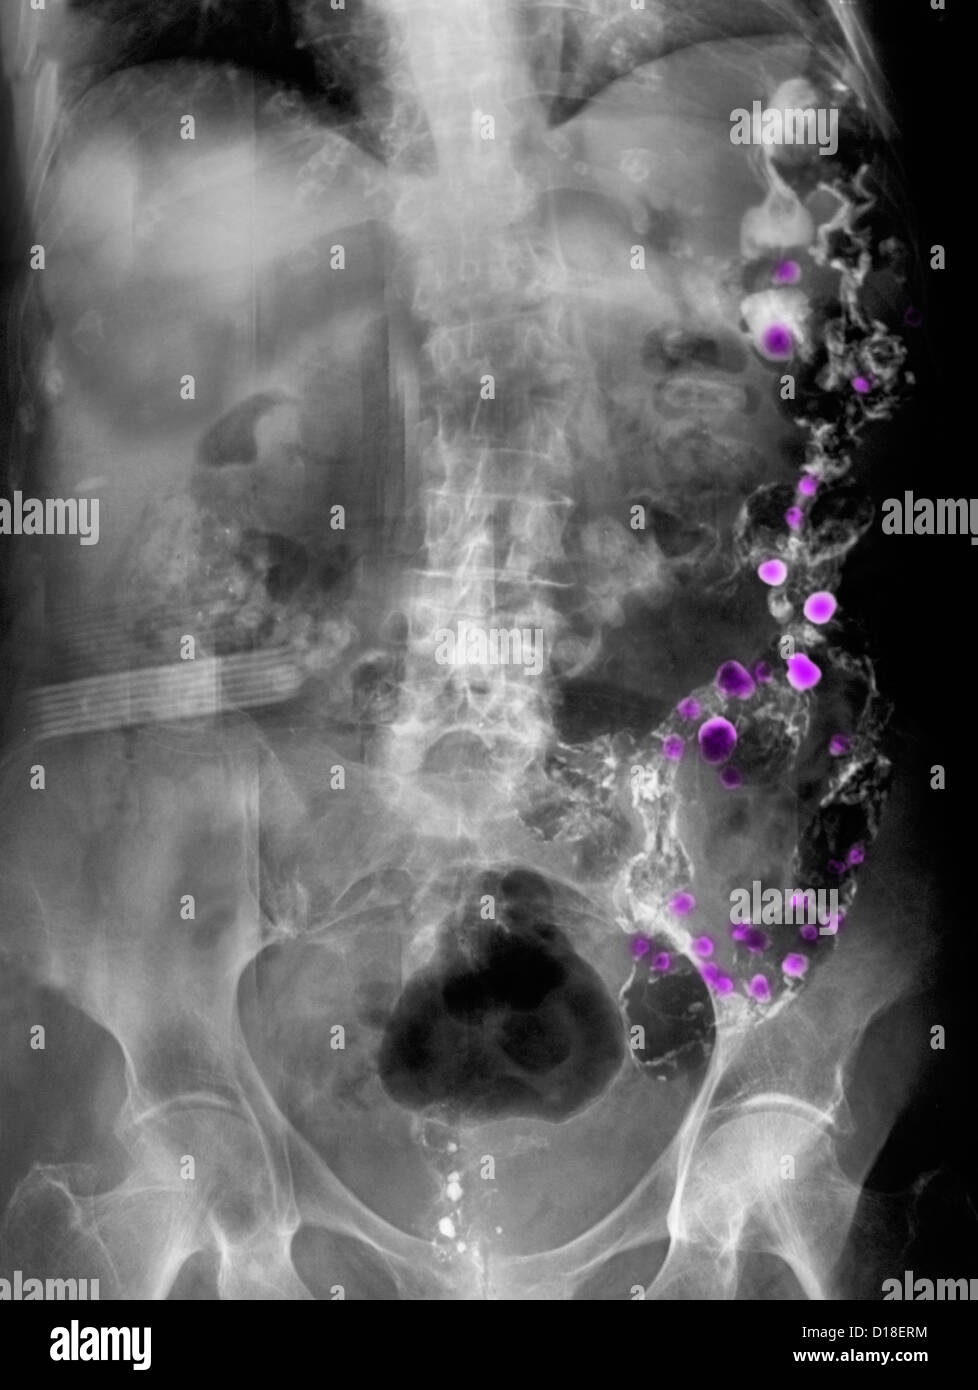 X-ray showing diverticulosis Stock Photo